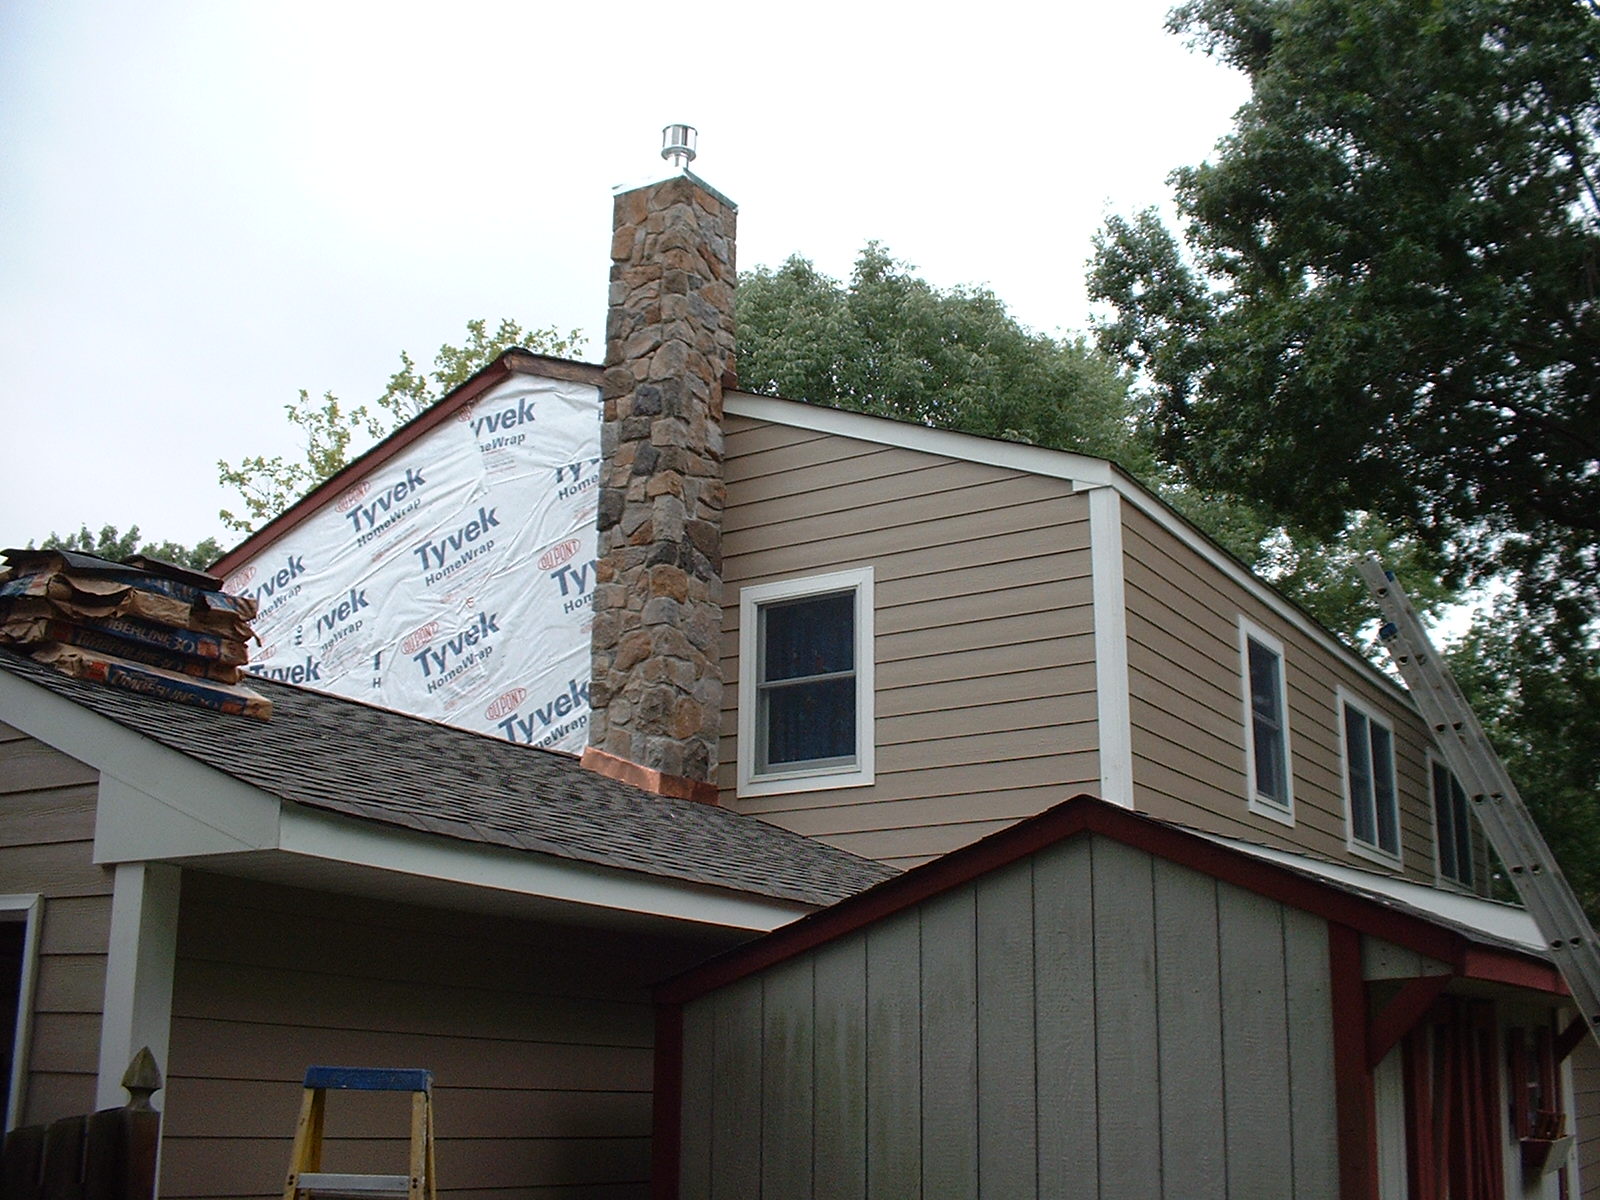 The siding is being done on the upper half of the house.